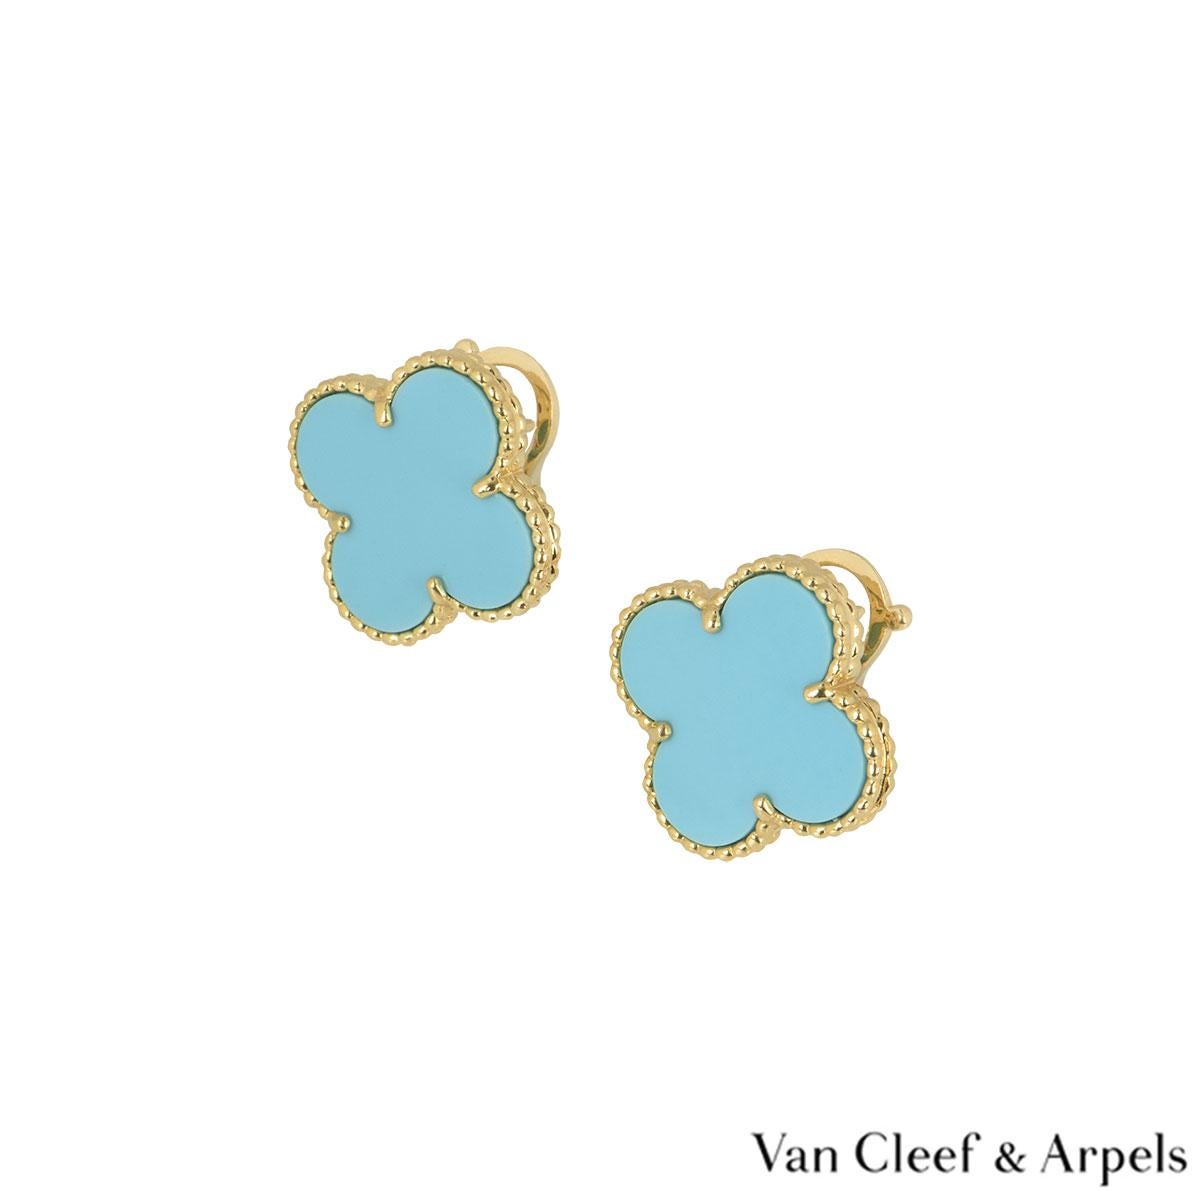 An iconic pair of 18k yellow gold Van Cleef & Arpels earrings from the Magic Alhambra collection. The earrings are composed of a four leaf clover motif with an turquoise inlay, complimented by a beaded edge. The earrings feature removable posts and